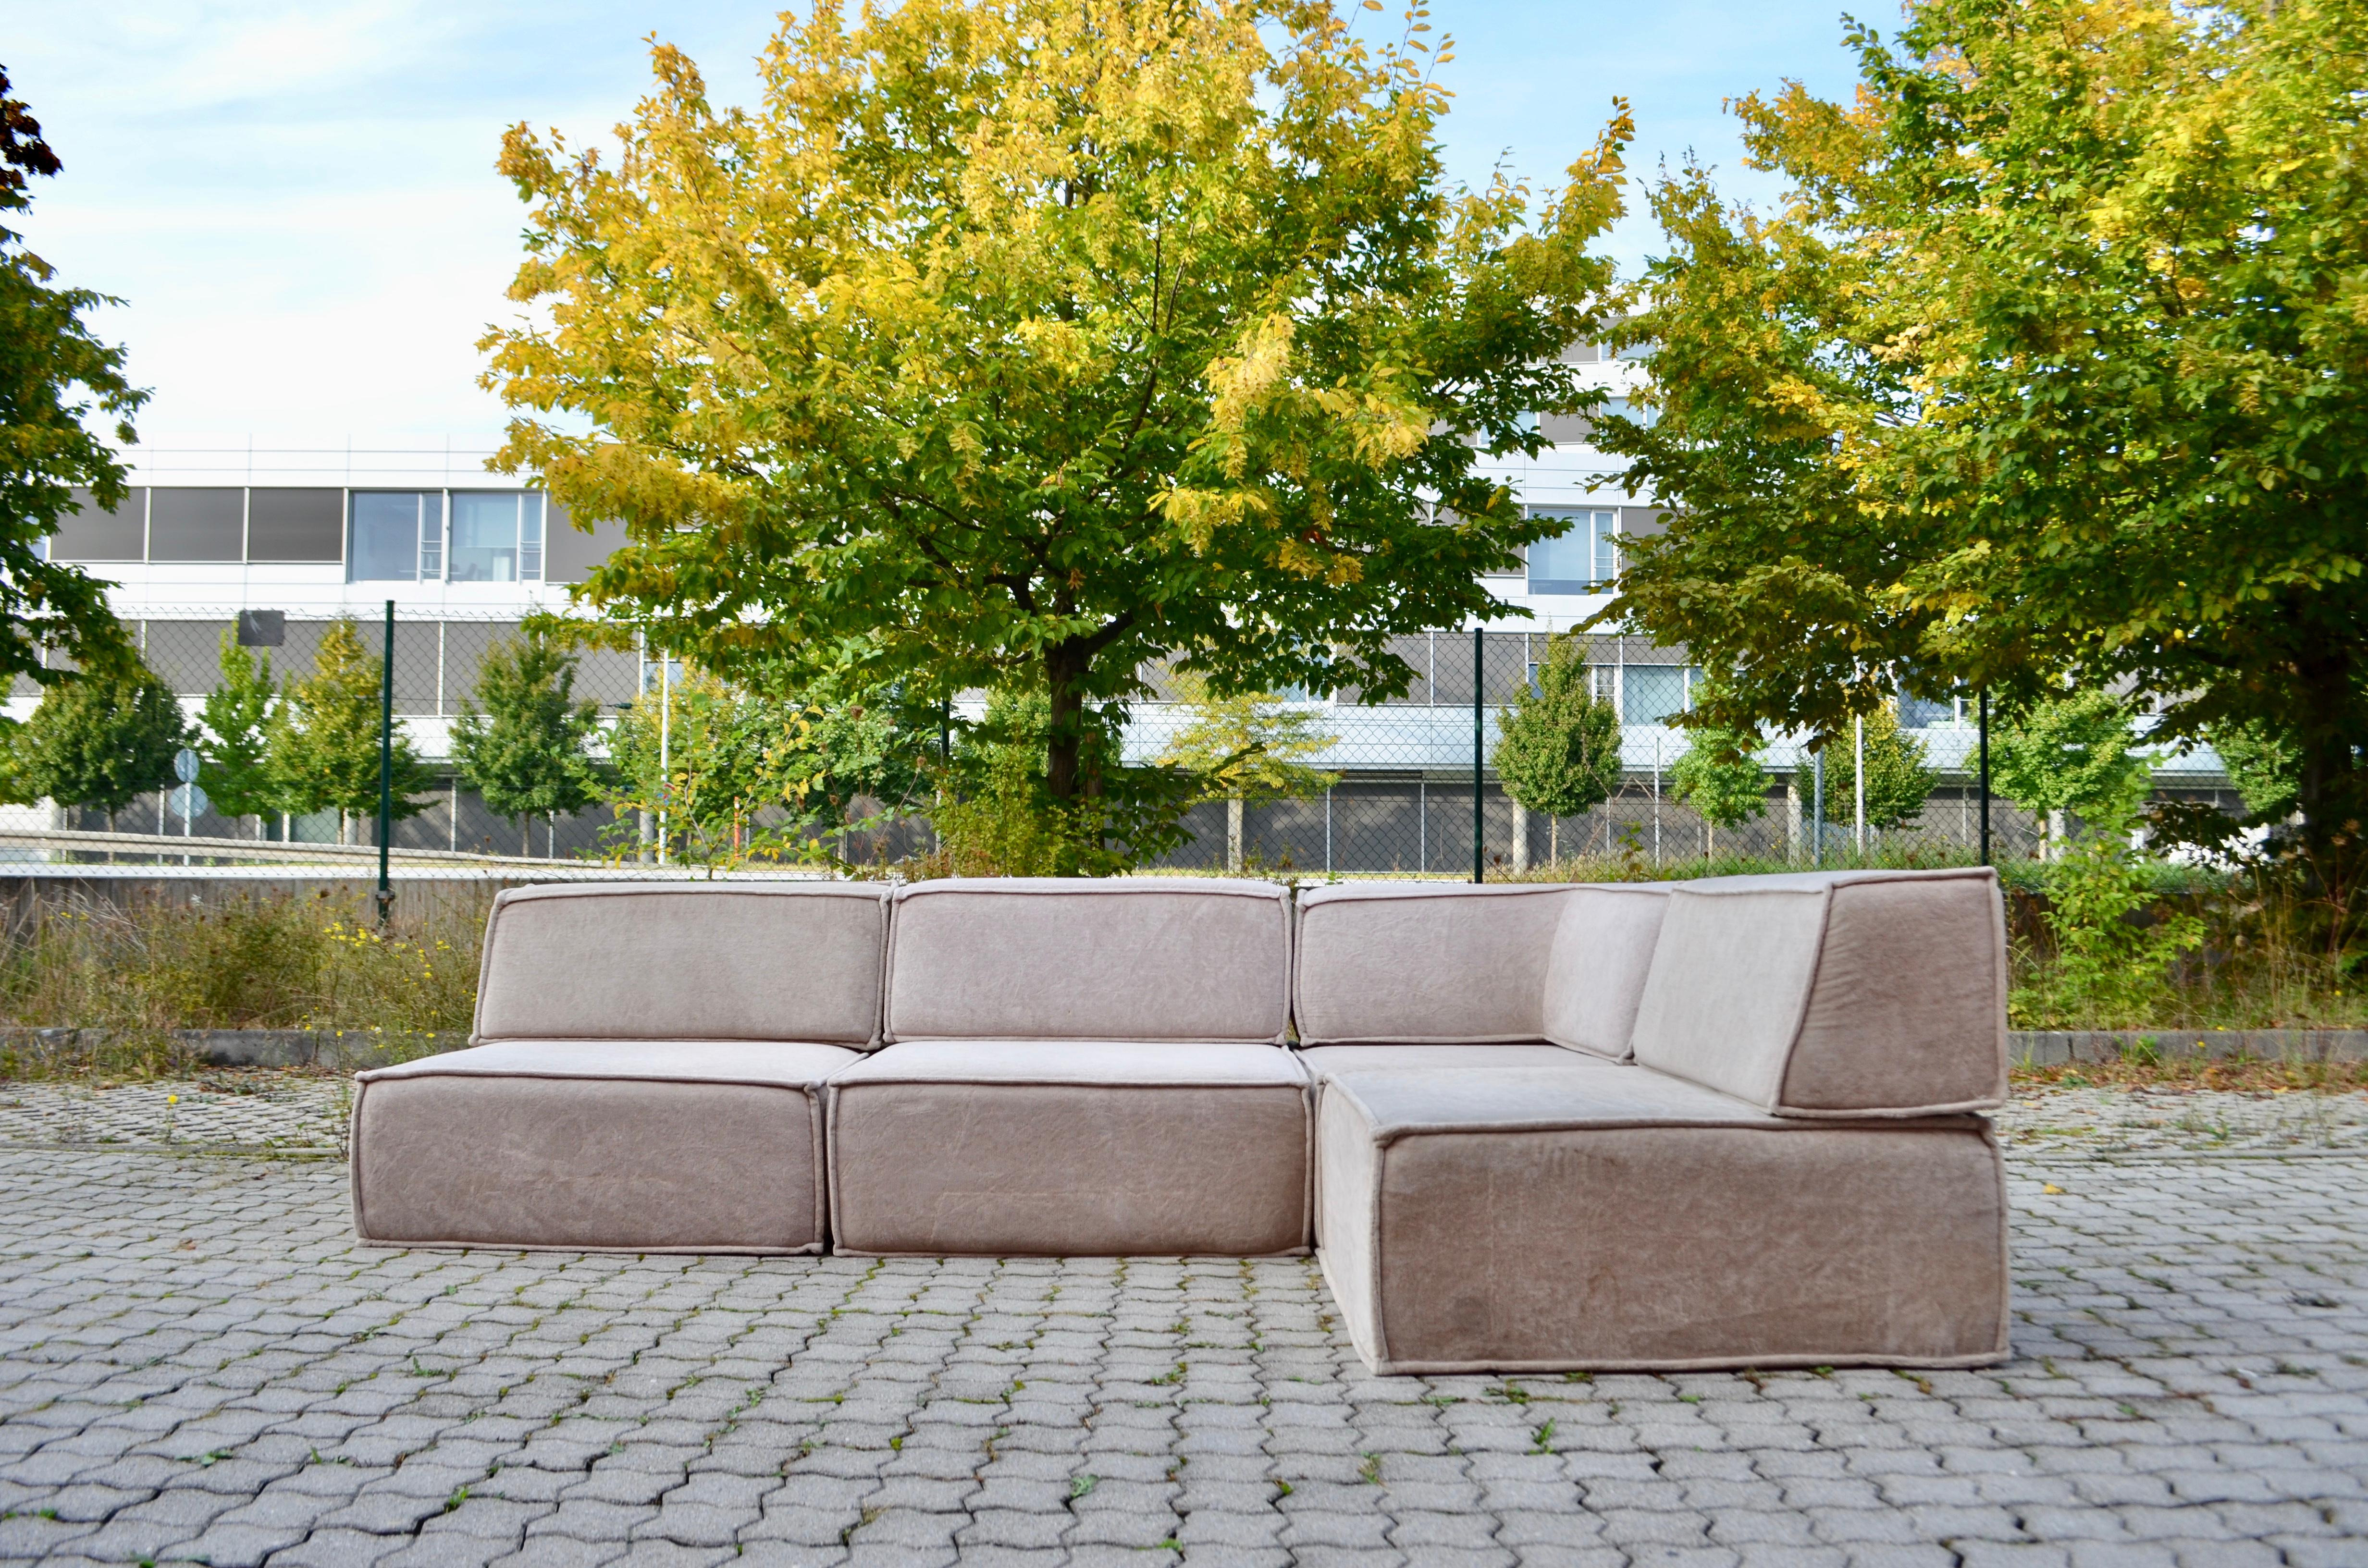 Beautiful vintage 1970s modular sofa from Germany.
The fabric is a soft ecru velours in good condition.

It consists 4 elements.
4 Seating elements
1 corner cushions
3 normal cushions
So you have 4 seating elements that can be arranged in